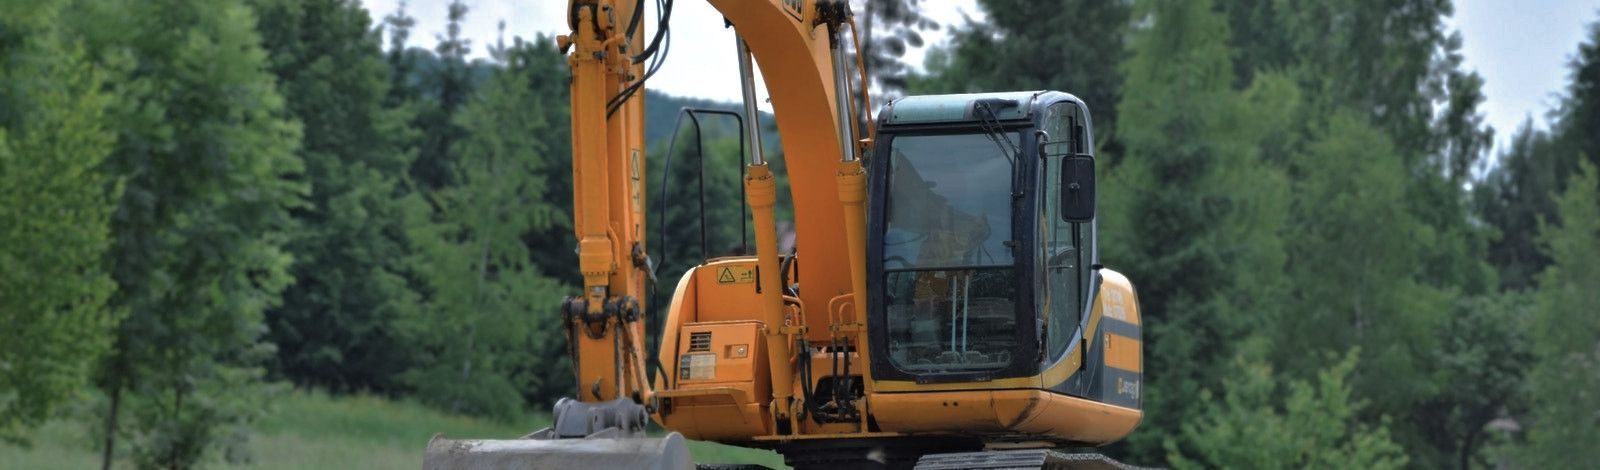 Photo of a large, orange-yellow construction machine with an arm and scoop. The background is a forested area with lots of trees and green grass.